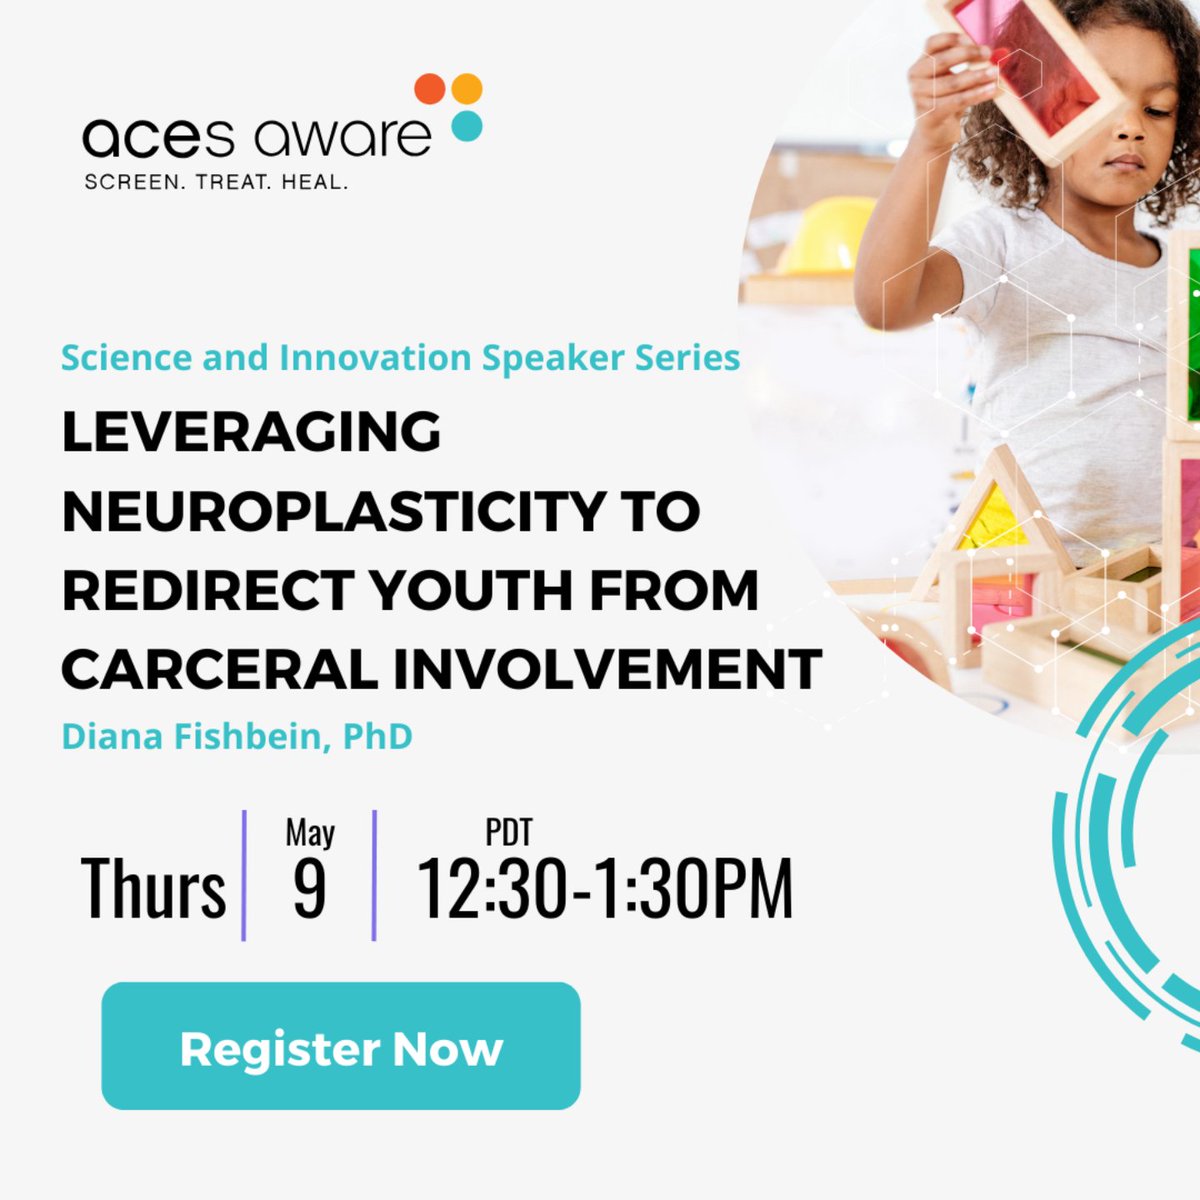 Please join us for the Leveraging Neuroplasticity to Redirect Youth from Carceral Involvement webinar, with Diana Fishbein, PhD. She will discuss how to disrupt an adverse developmental pathway in young people that may lead to incarceration. Register now: bit.ly/44sFspF